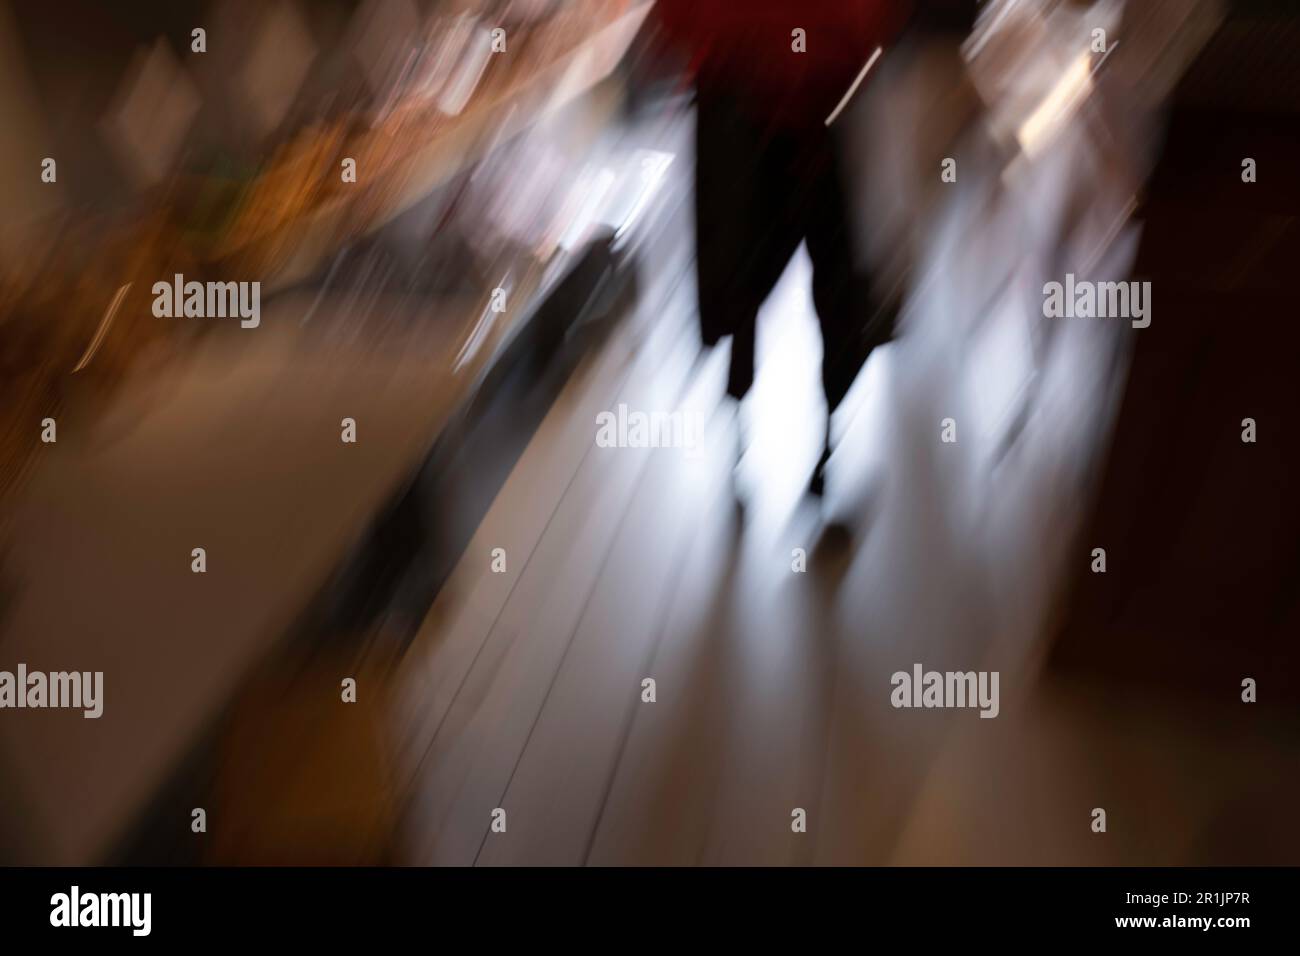 Abstract view with motion blur of a silhouette of a confused person on a wooden floor with backlight. Background image Stock Photo